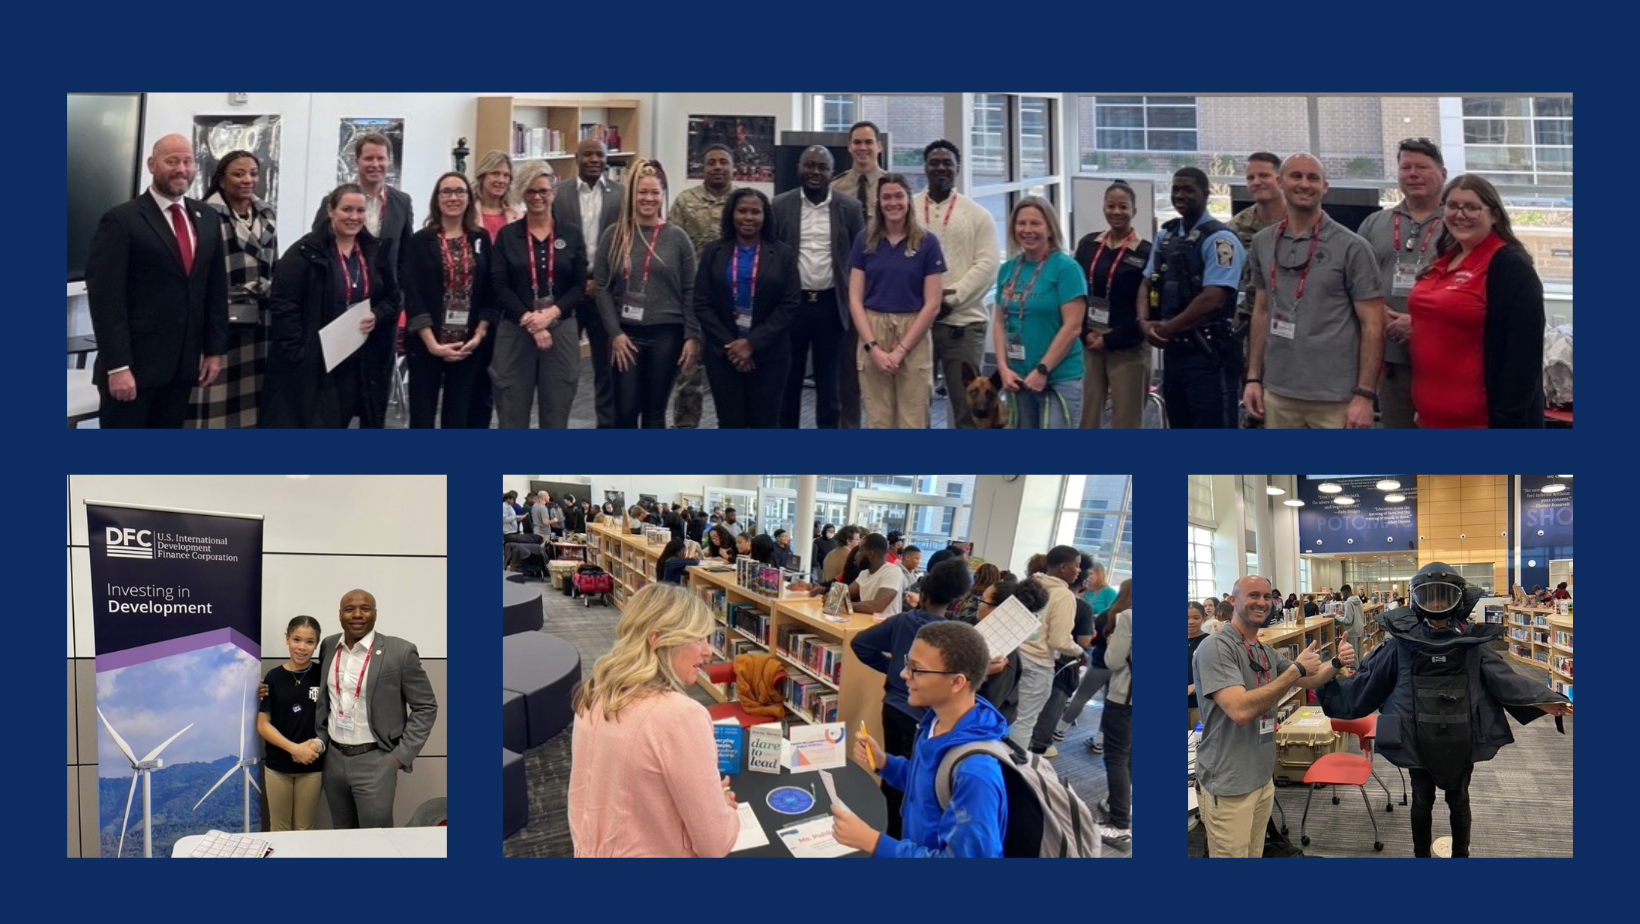 Collage of photos taken from the Potomac Shores Career Fair showing students and presenters